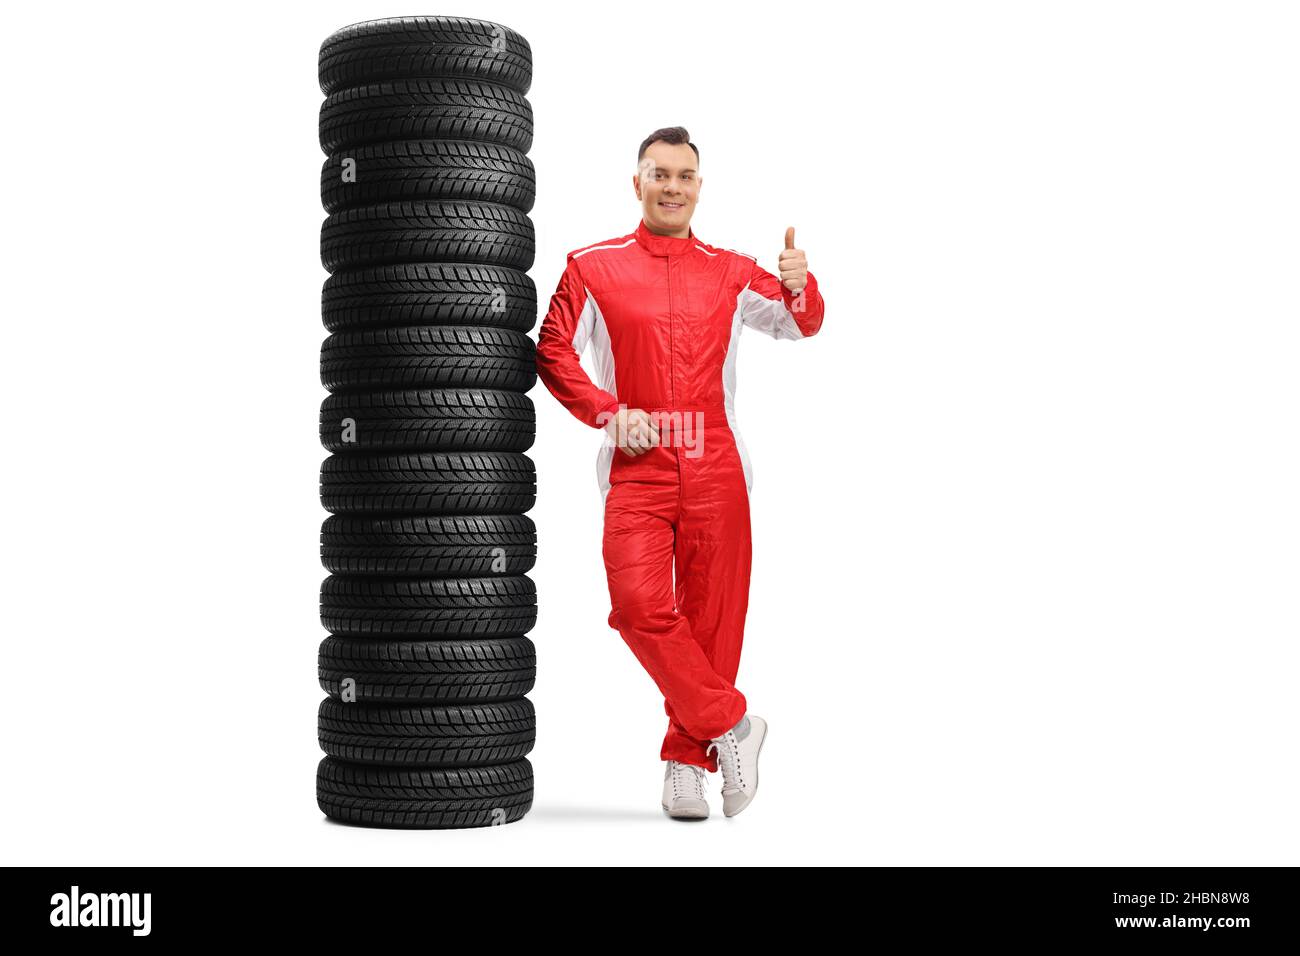 Full length portrait of a racer leaning on a pile of tires and gesturing a thumb up sign isolated on white background Stock Photo